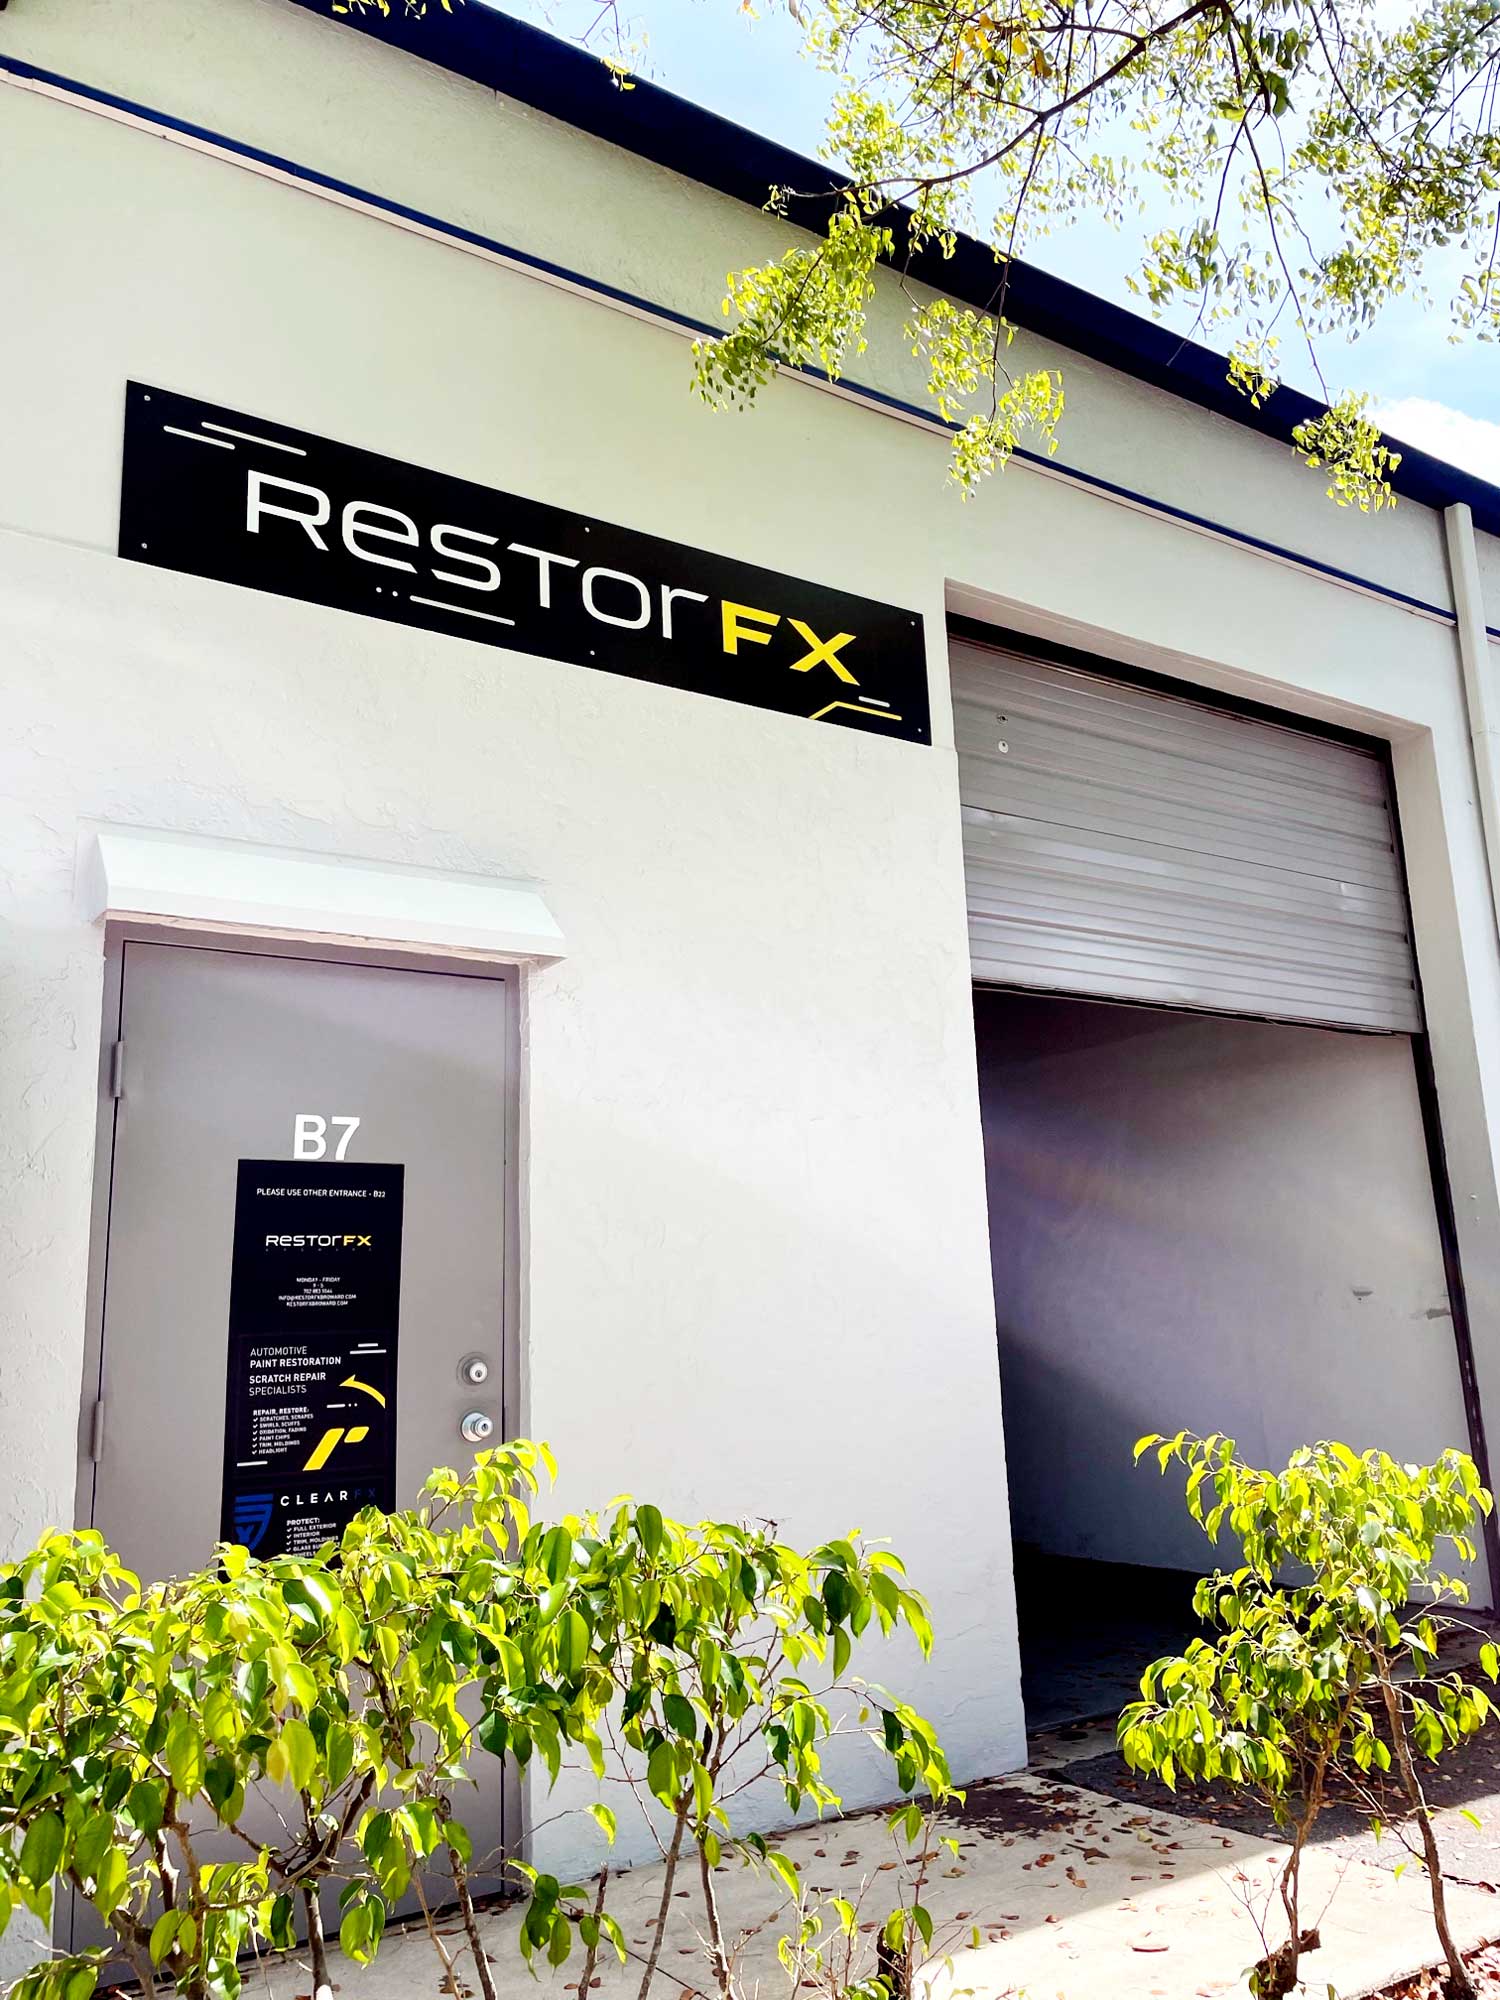 RestorFX Broward storefront with white walls, branded signage and entrance next to garage door